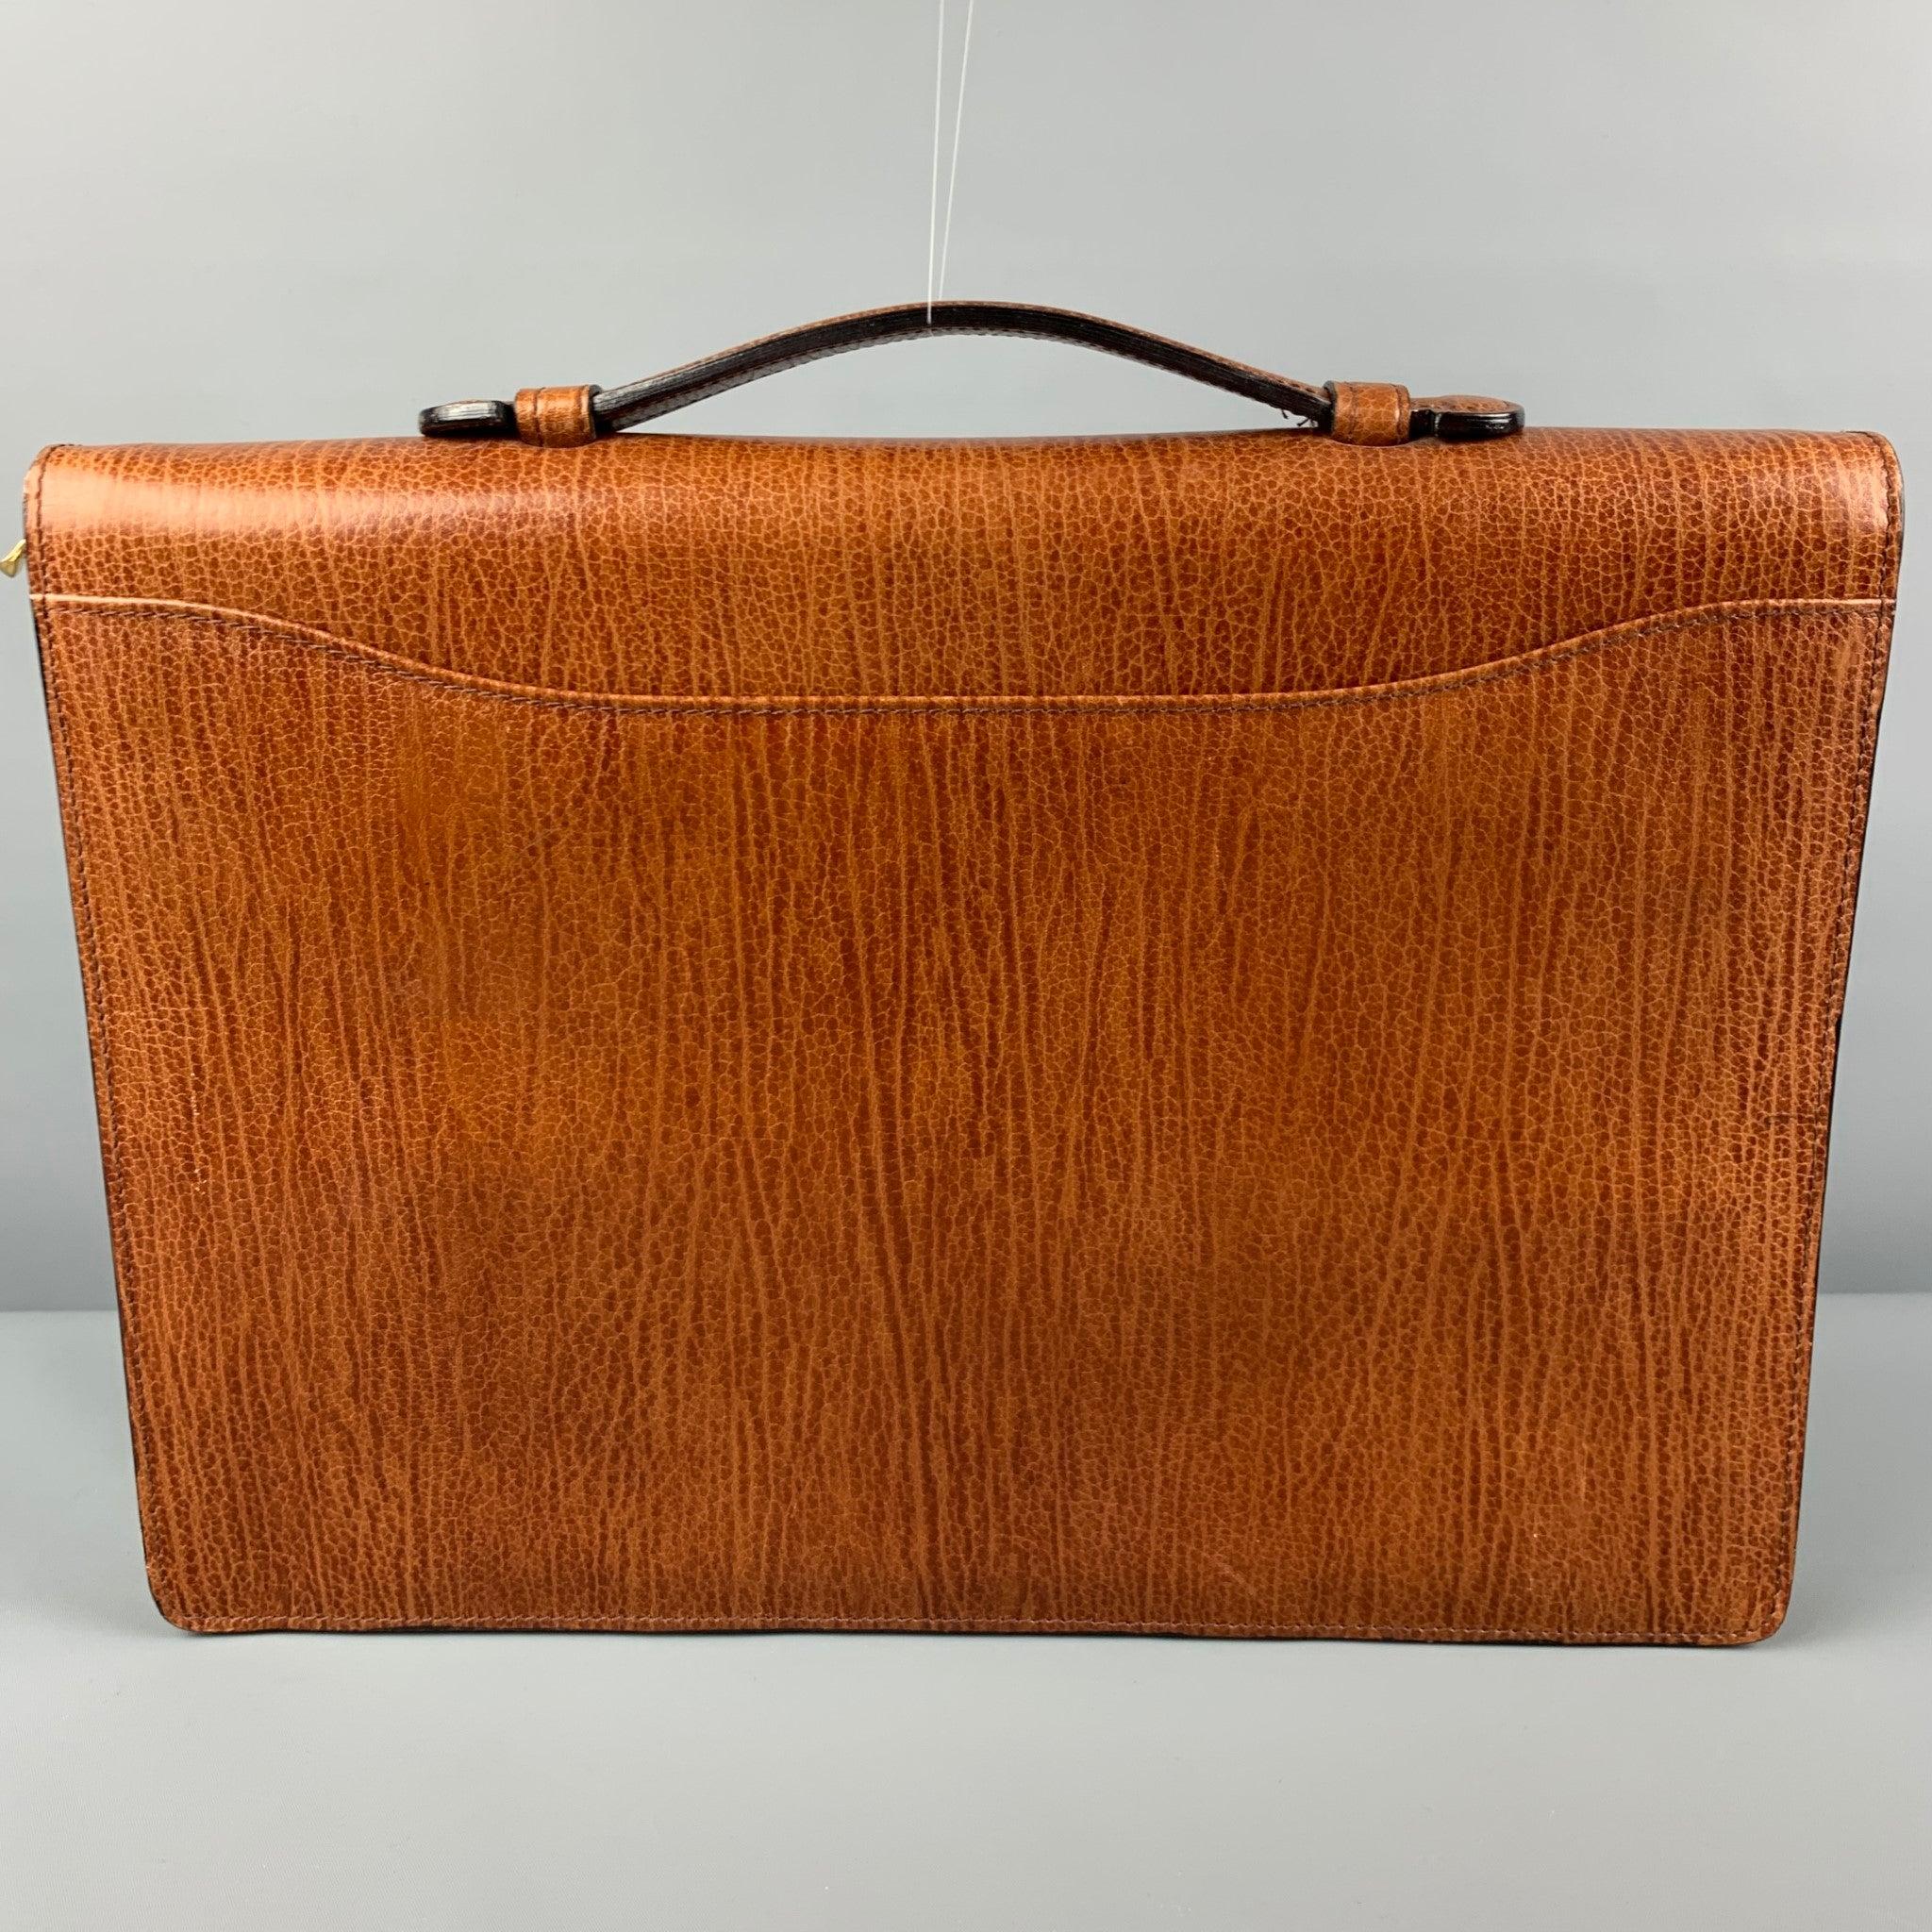 BALLY Cognac Leather 3 Ring Binder In Good Condition For Sale In San Francisco, CA